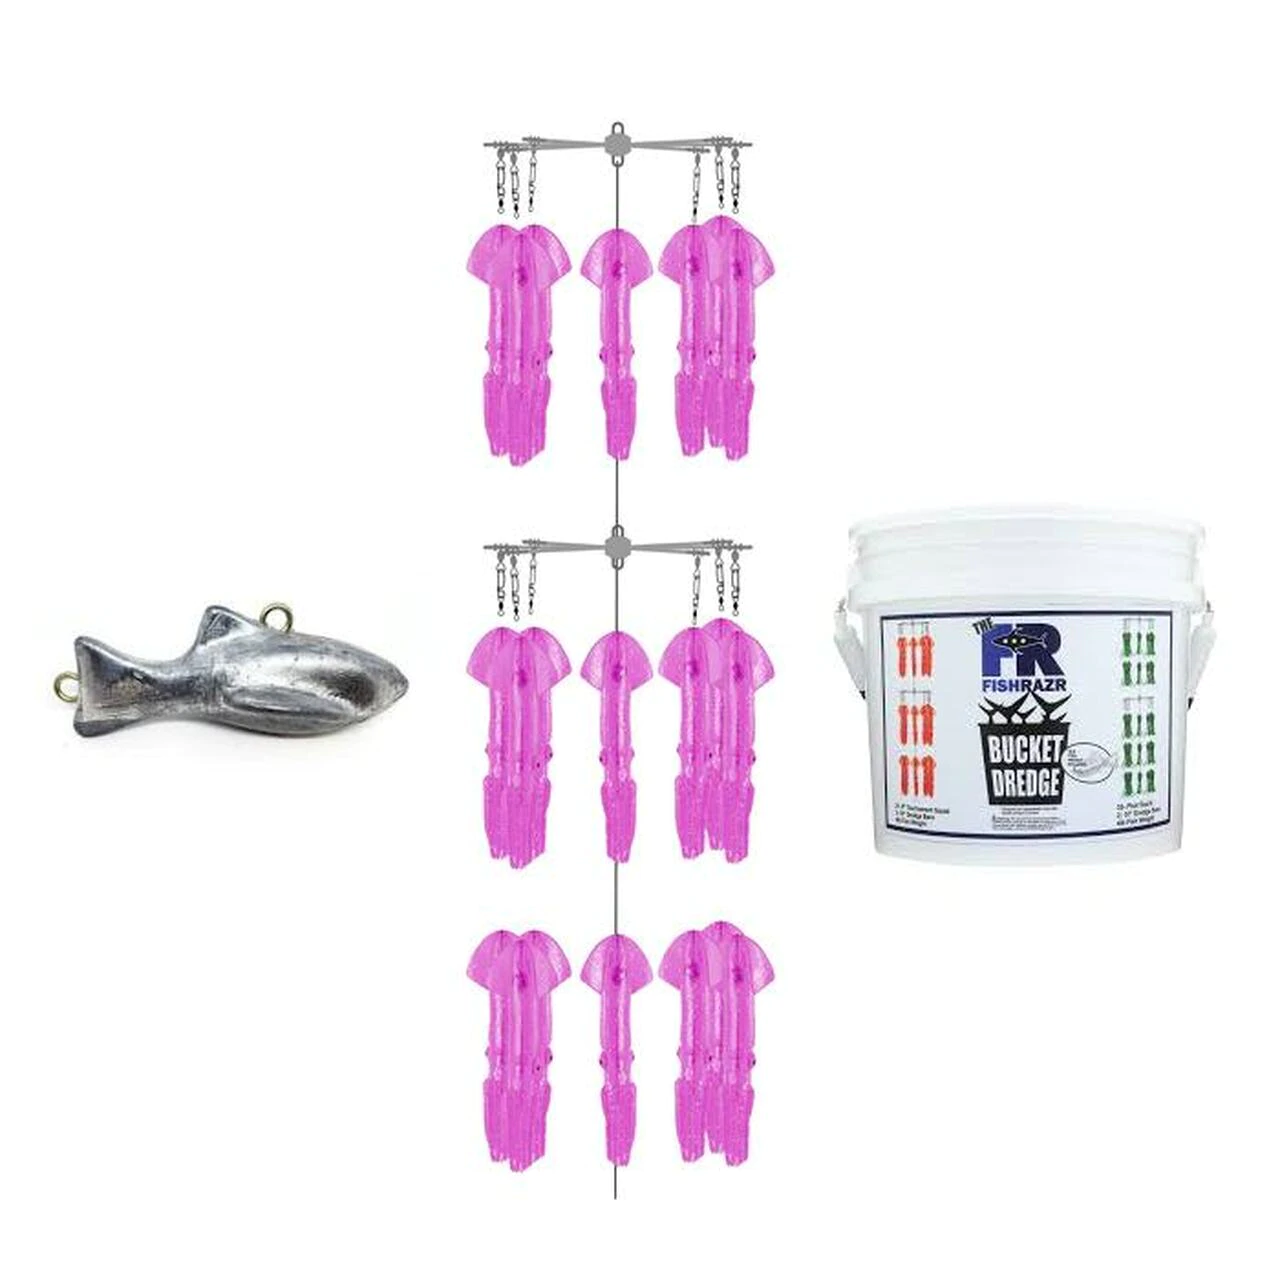 Fish Razr Bucket Dredge with Squids and Weight Pink